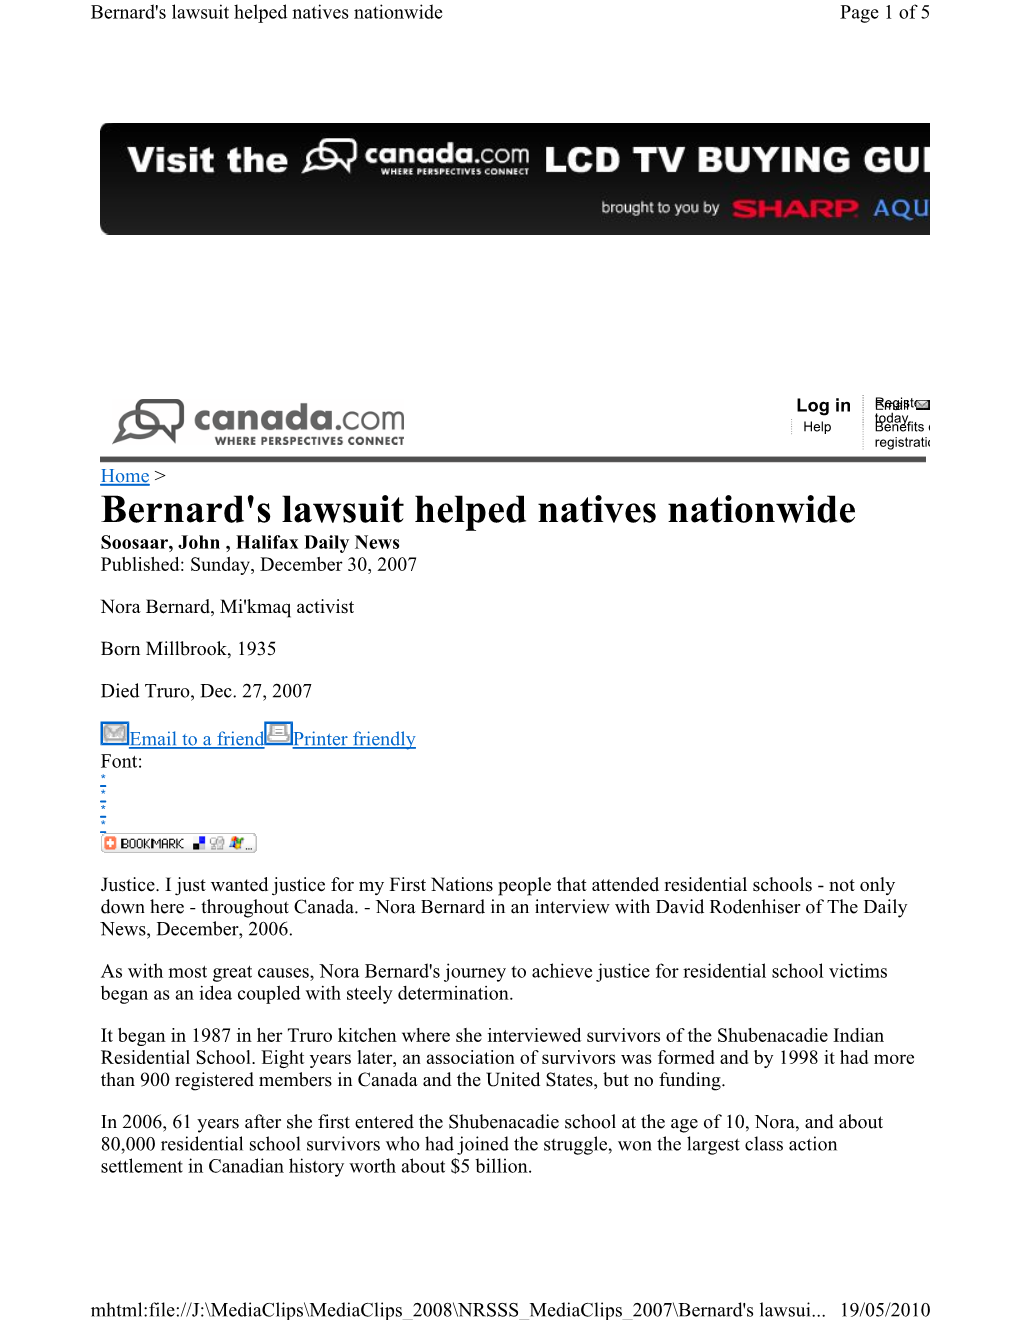 Bernard's Lawsuit Helped Natives Nationwide Page 1 of 5